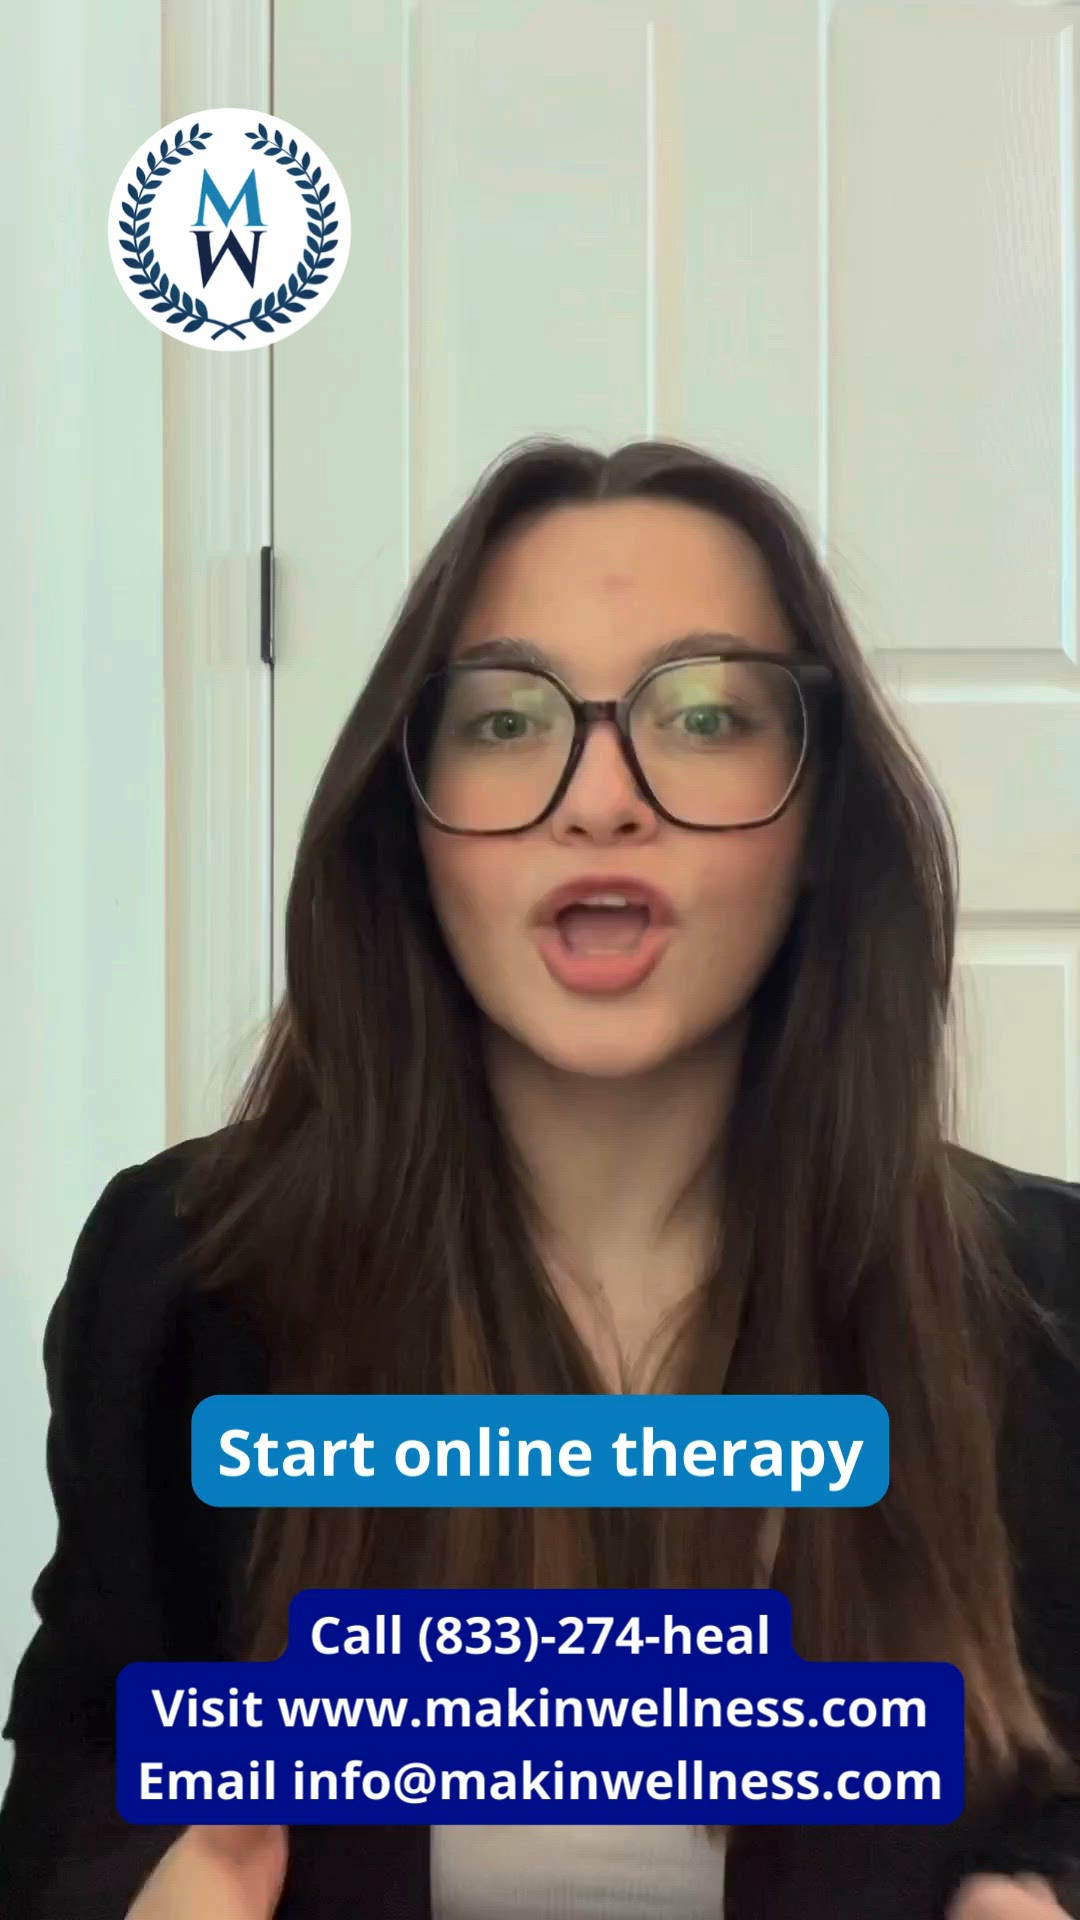 Makin Wellness | Online Therapy & Counseling